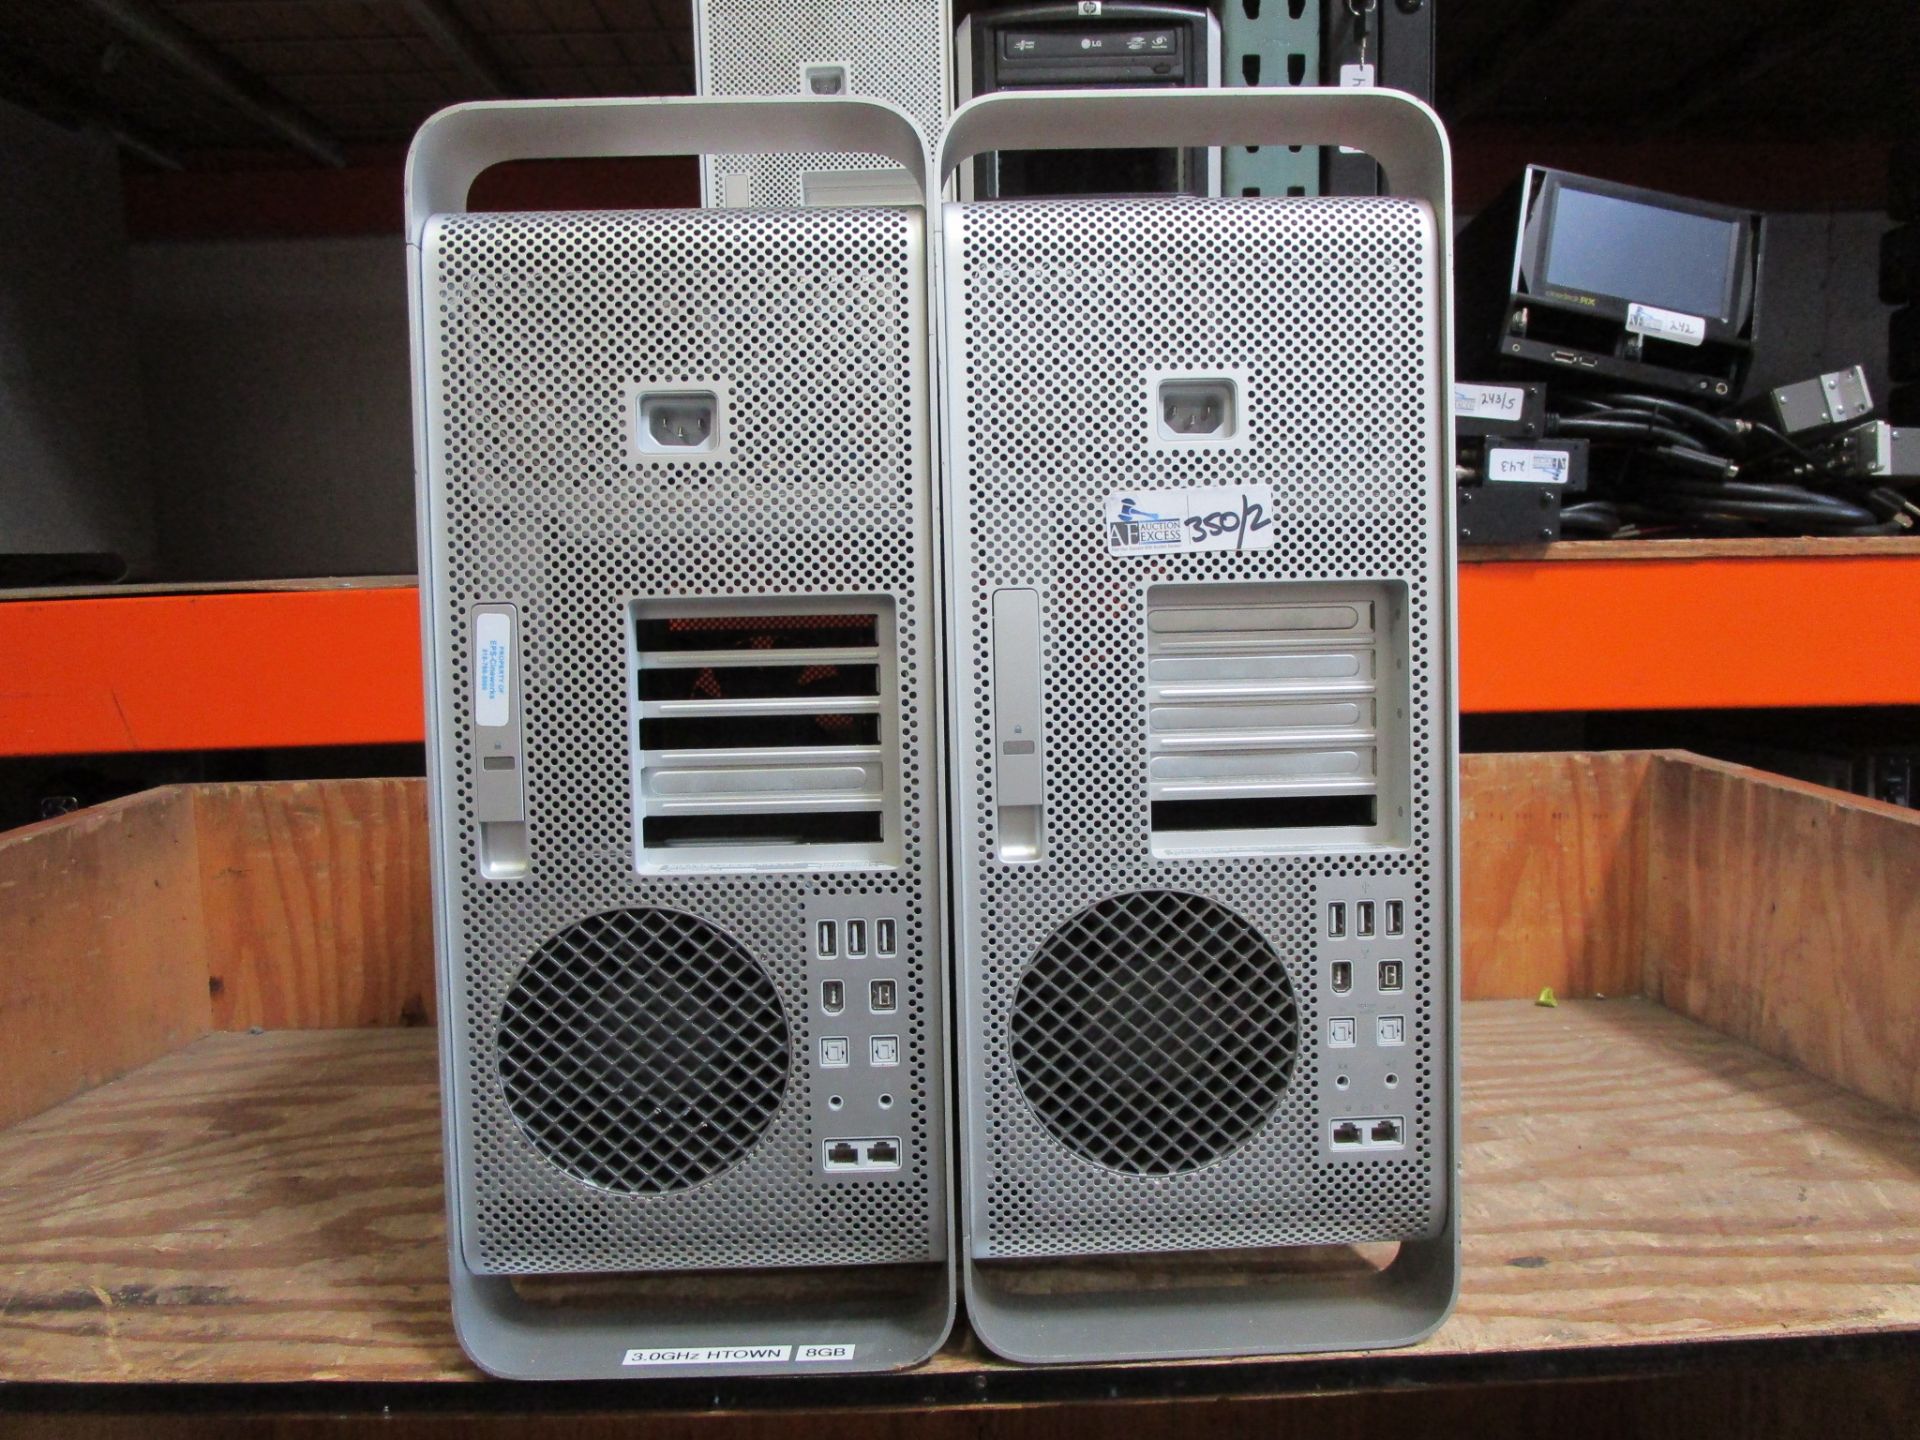 LOT OF 2 MAC PRO TOWERS